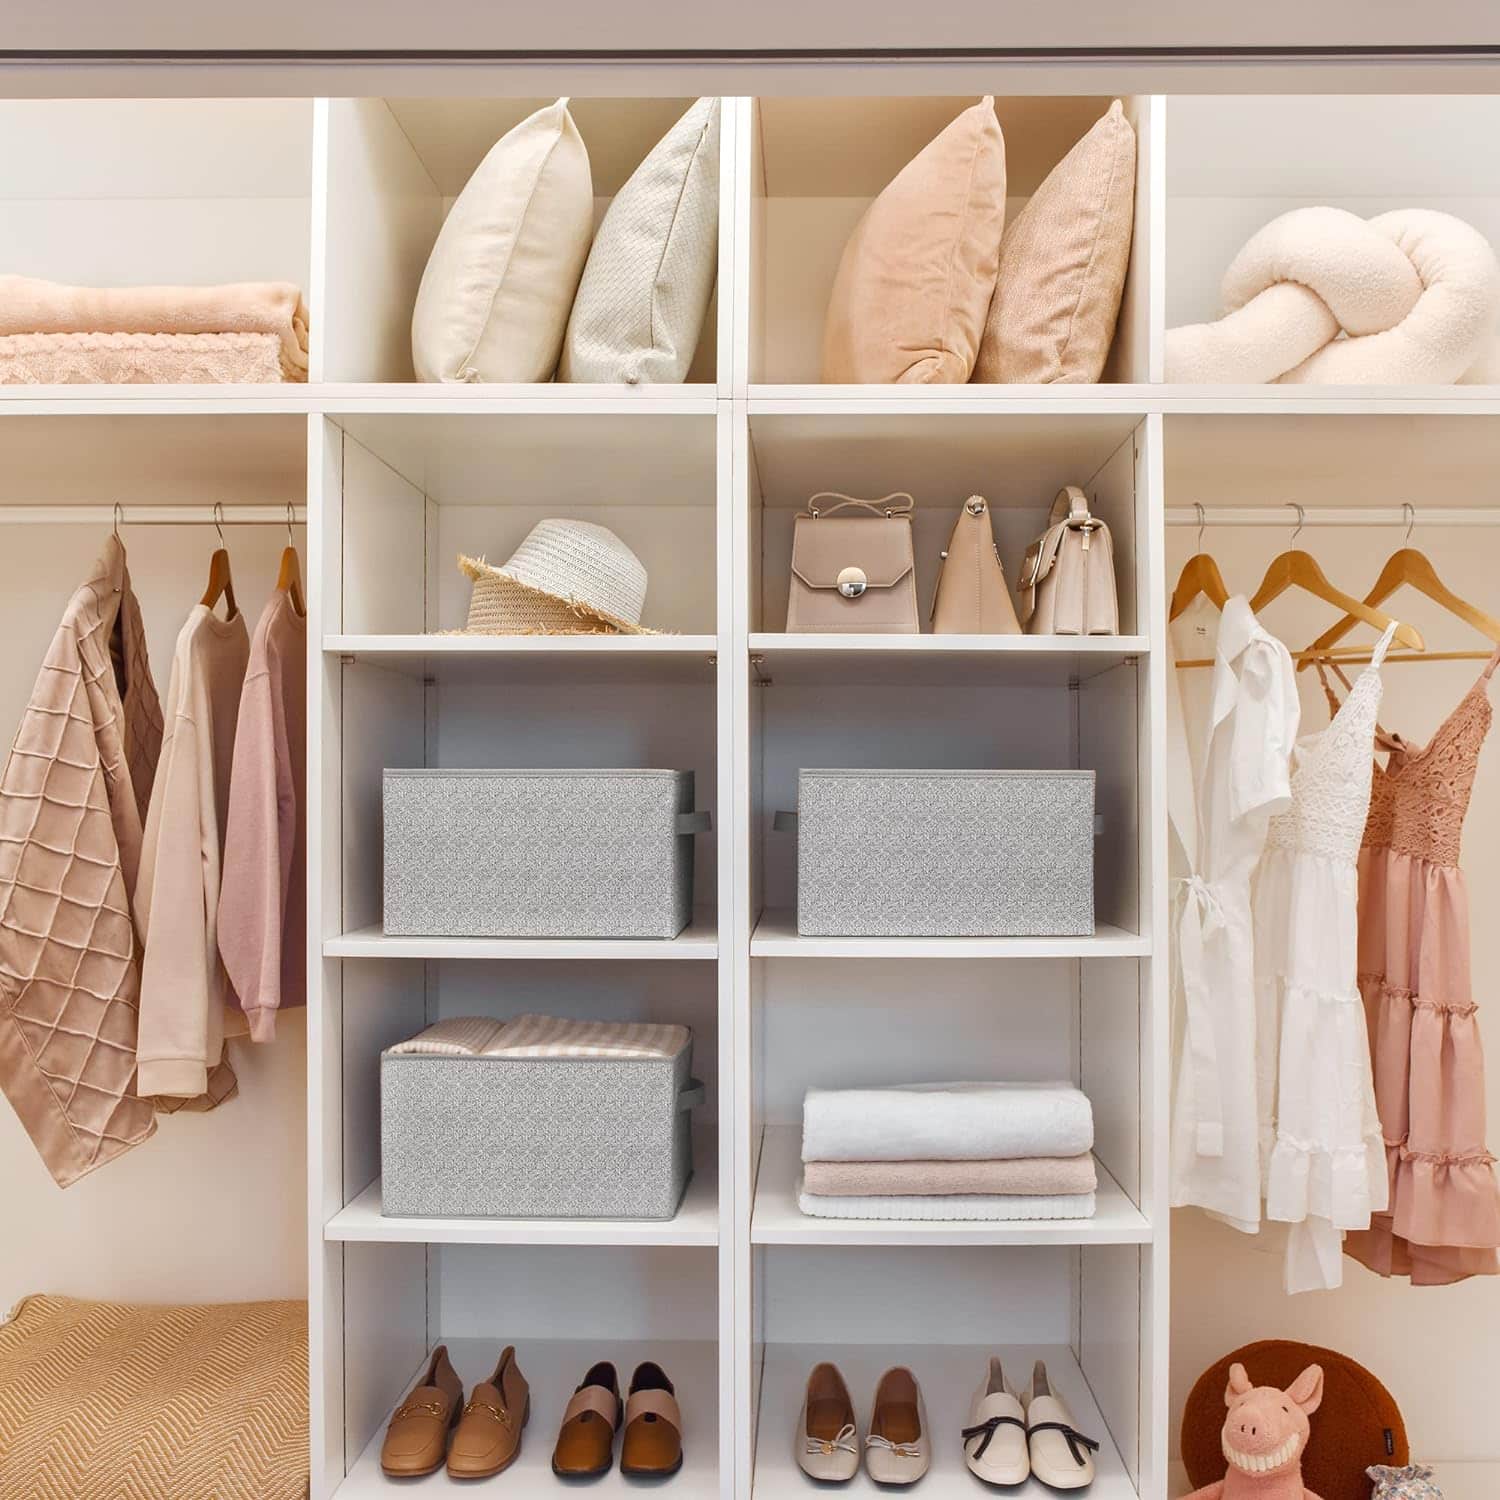 Best Storage Bins for Your Clothes